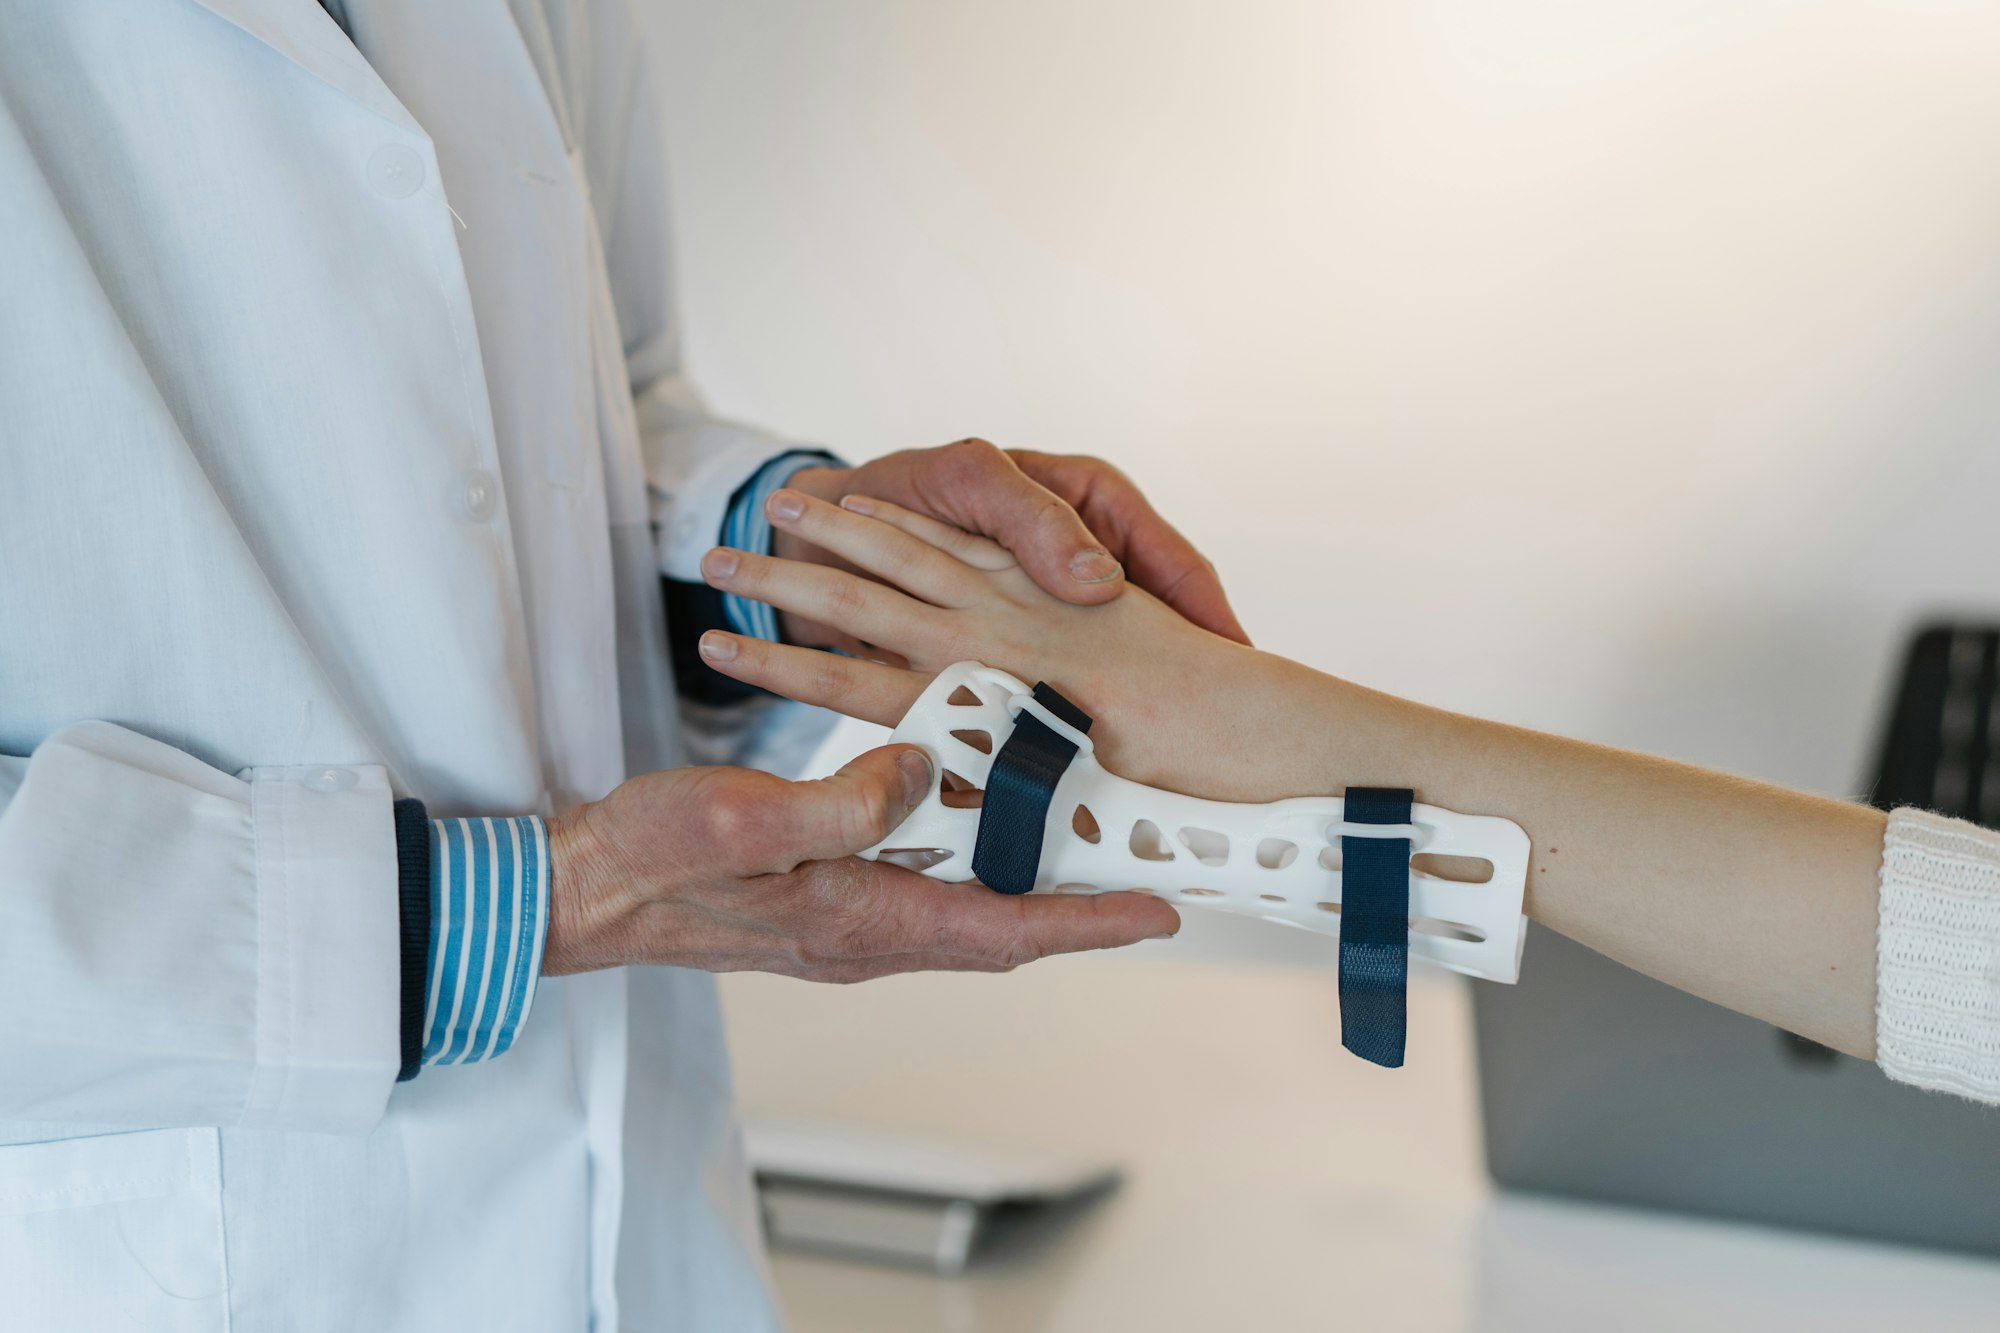 5 Best Wrist Braces of 2022 (COMPLETE BUYING GUIDE)